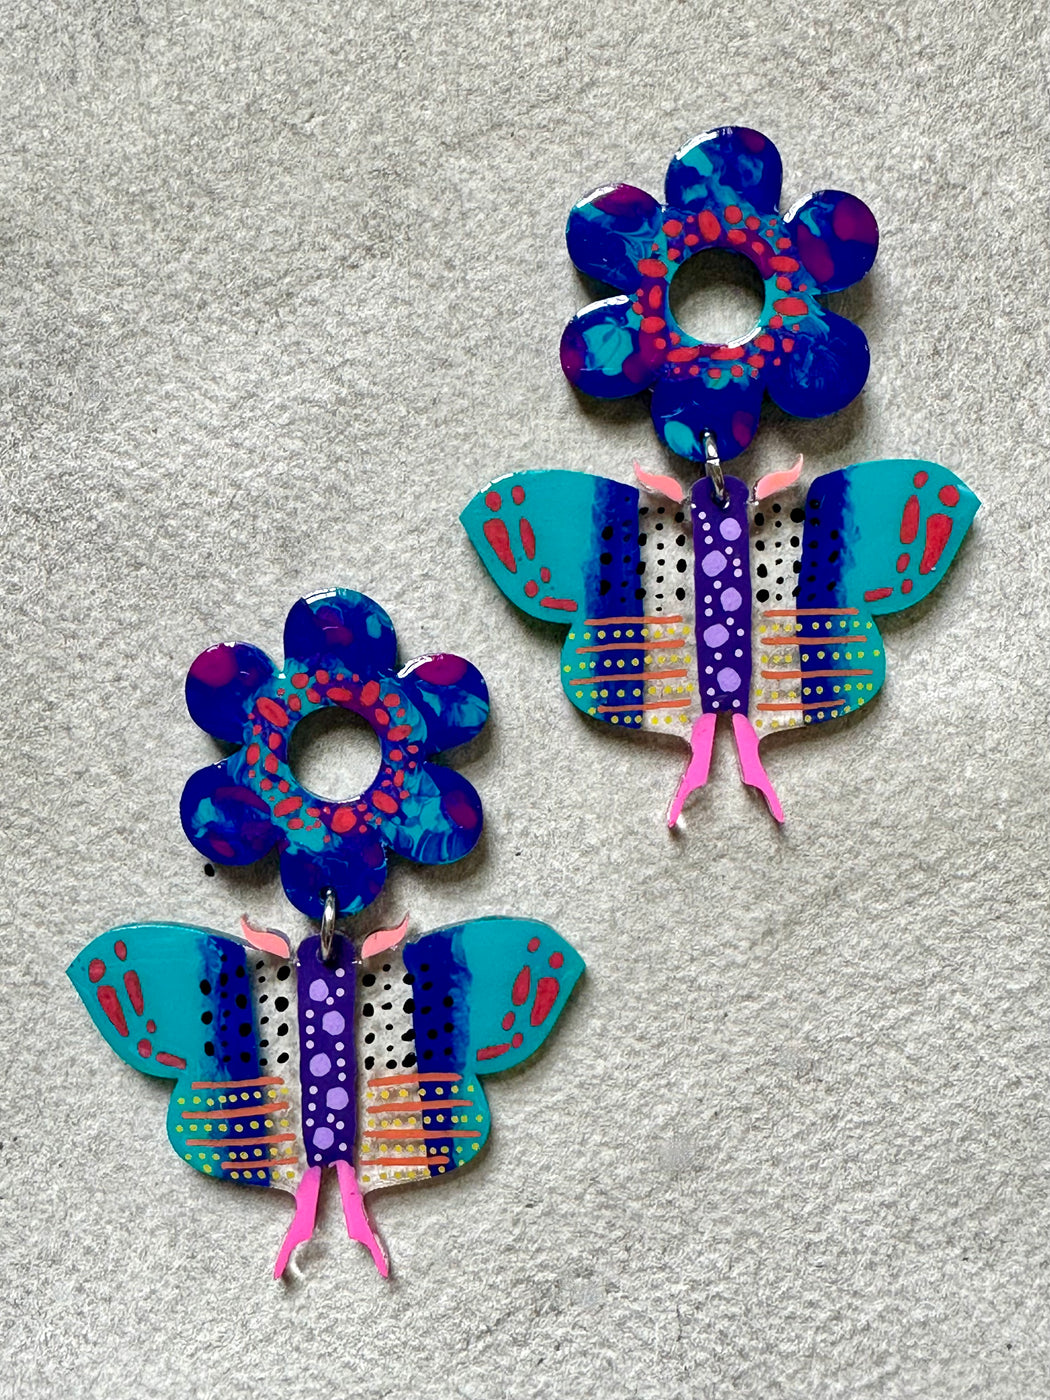 "Butterfly" Resin Earrings by Christina Misic